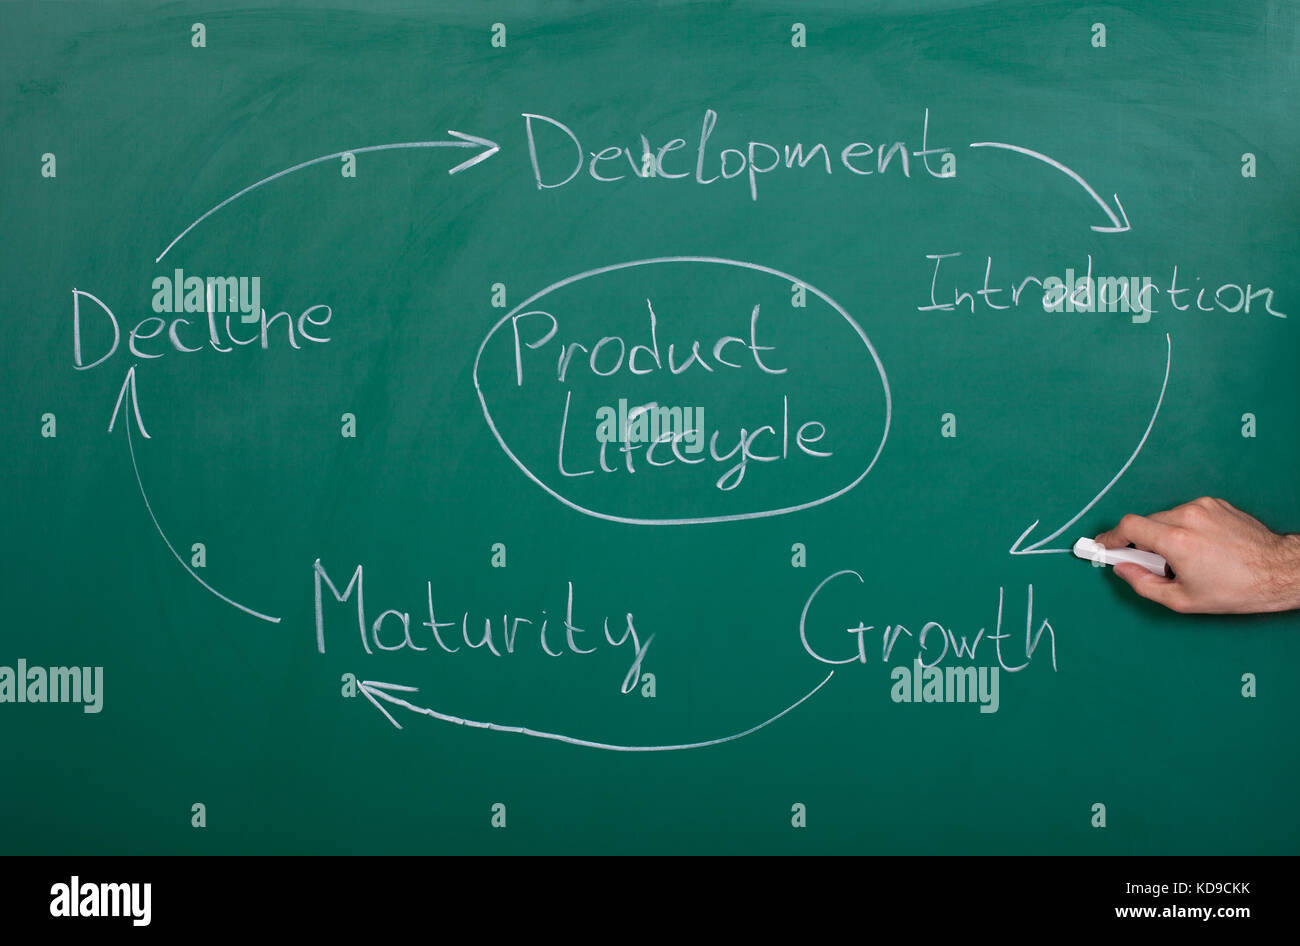 Hand Drawing Product Lifecycle Drawn On Blackboard Stock Photo